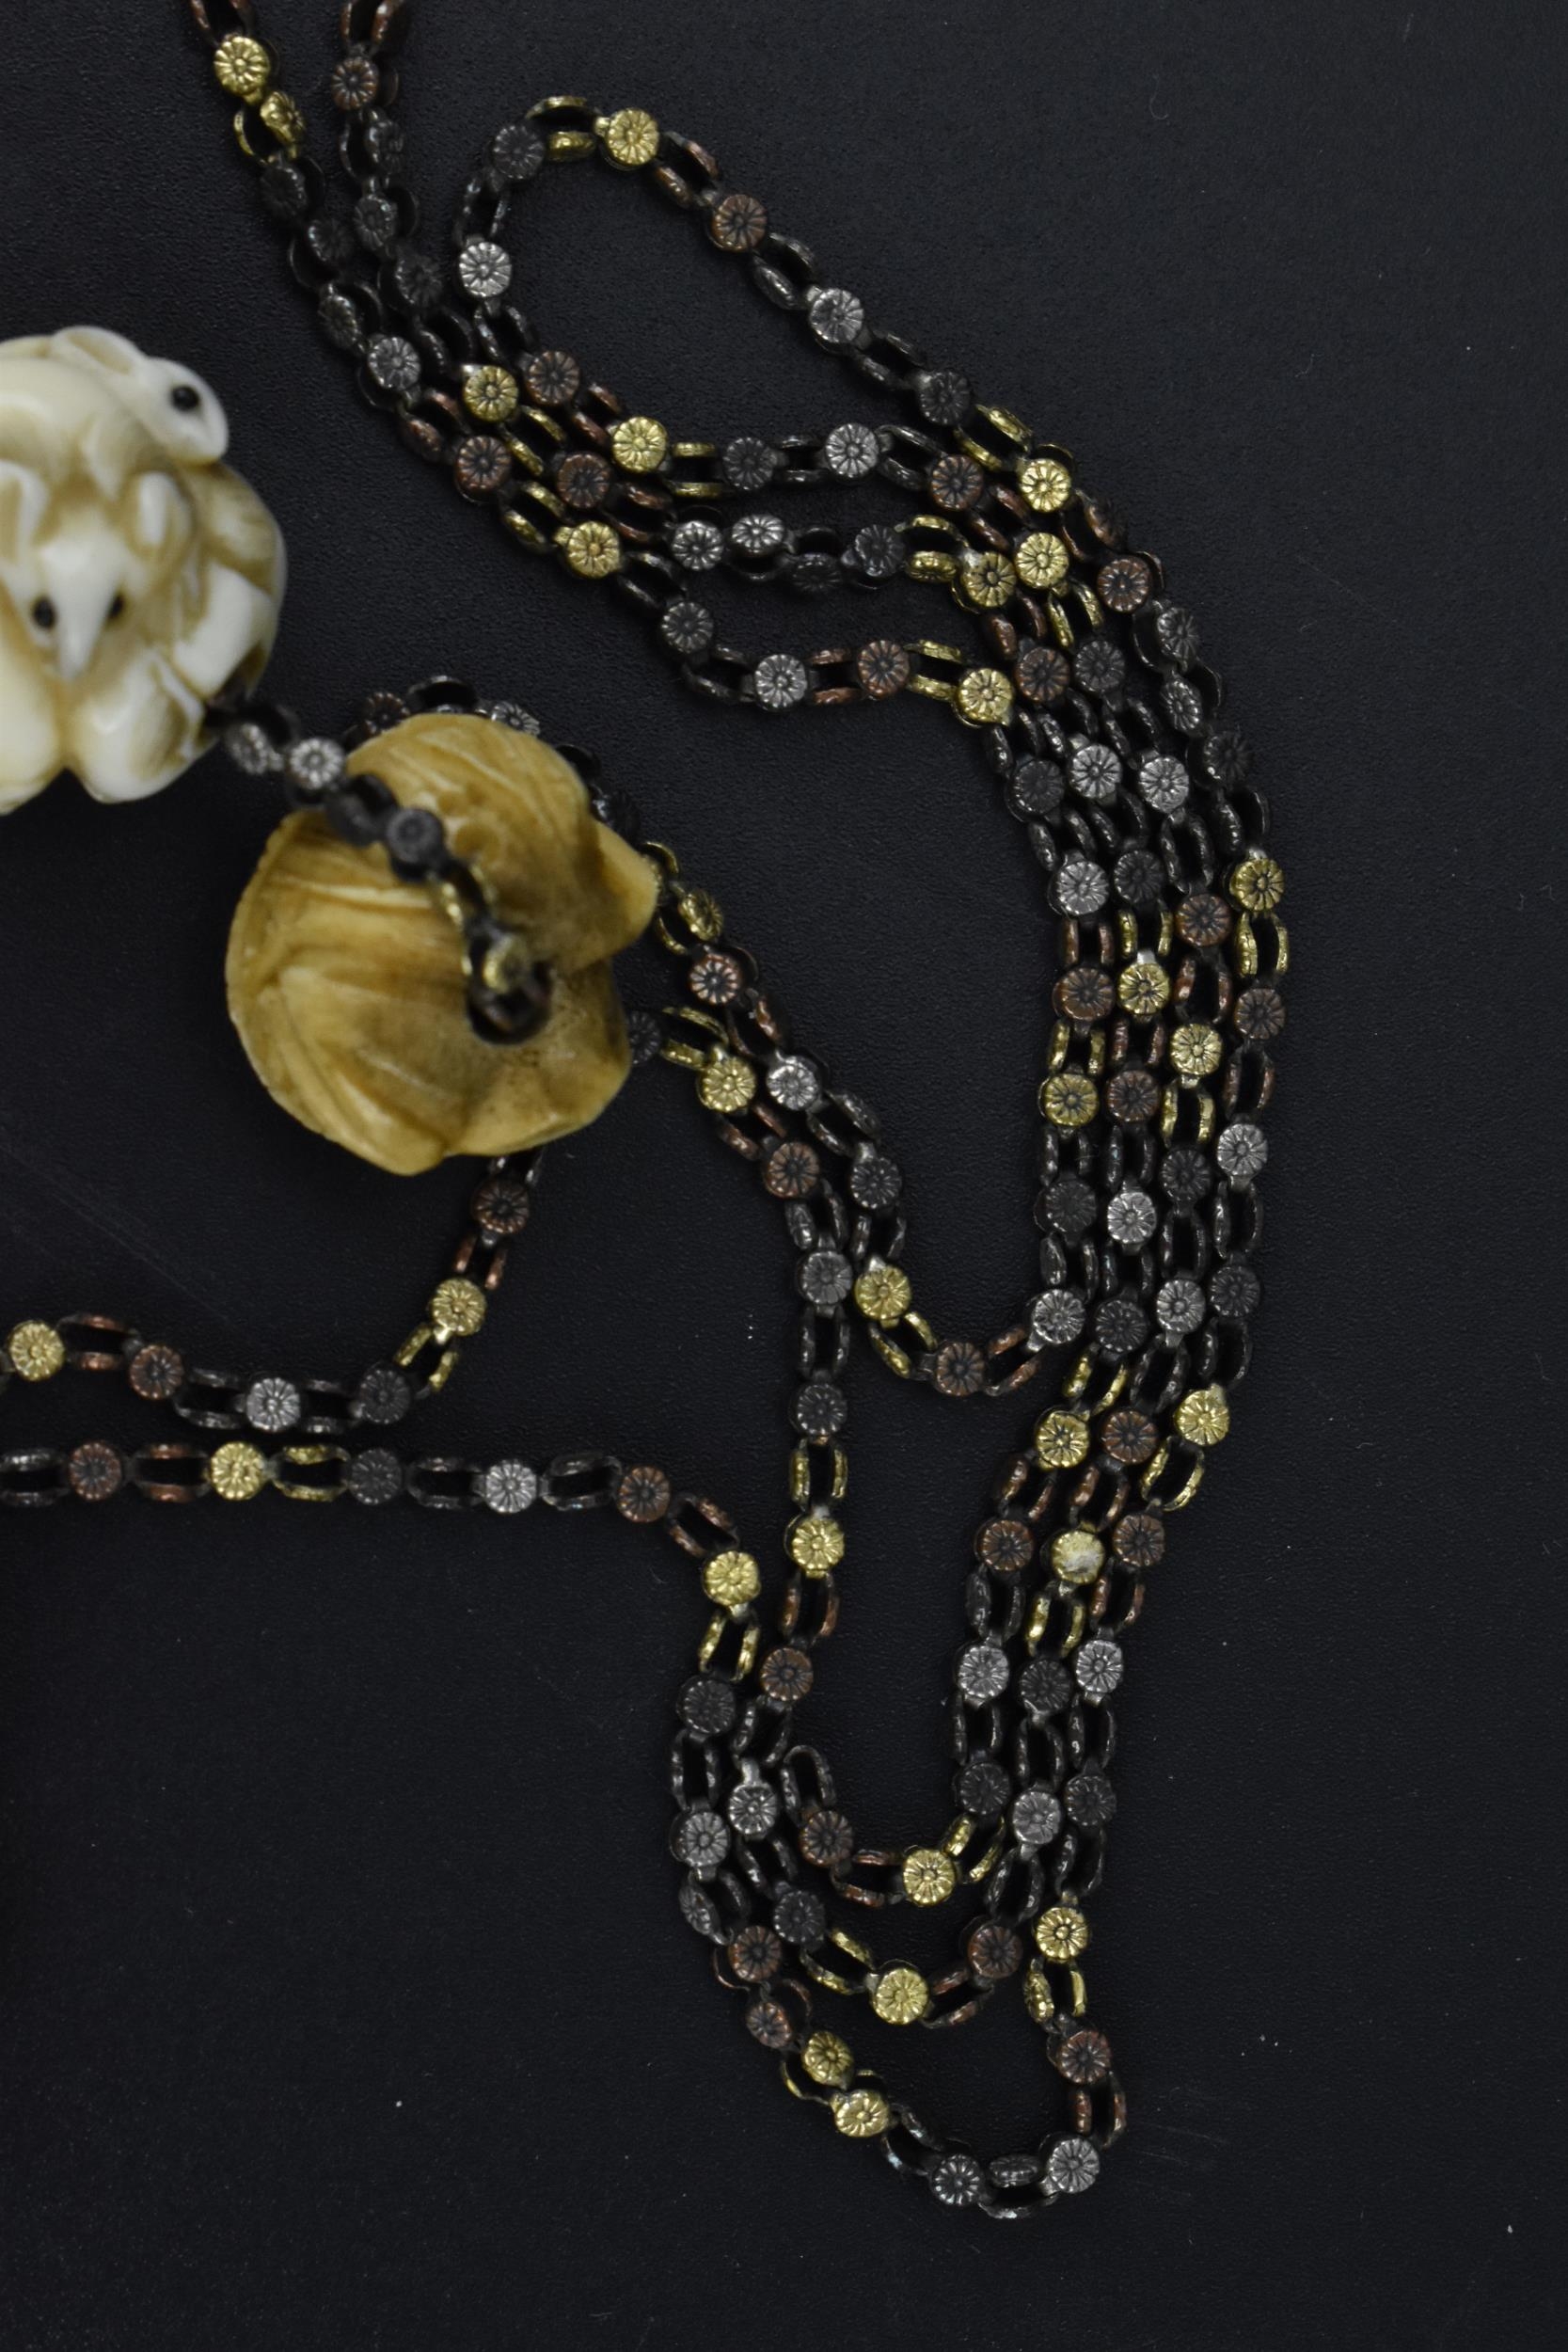 A 19th century Japanese ojime bead necklace, with carved ivory, bone, and metal ojimes, modelled - Bild 7 aus 7